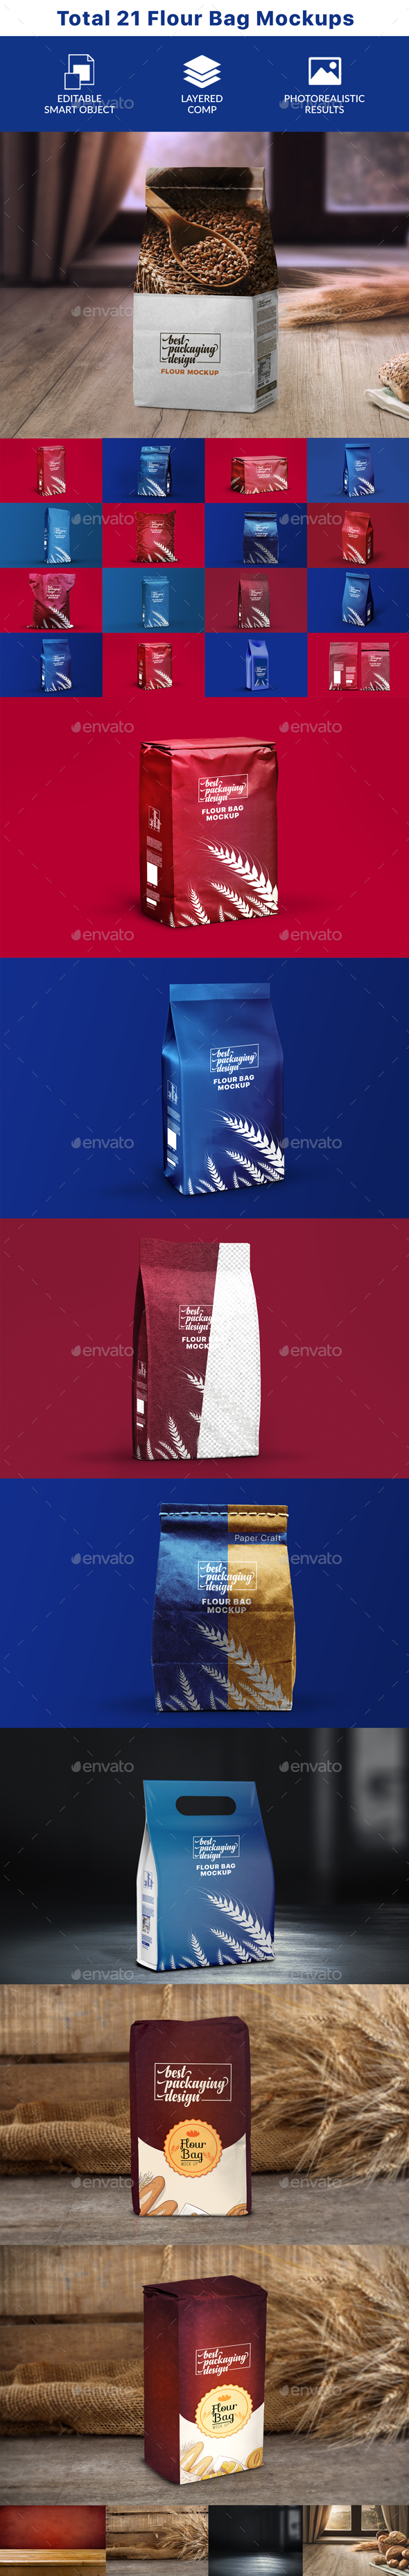 Download Flour Pack Mock Up » Tinkytyler.org - Stock Photos & Graphics